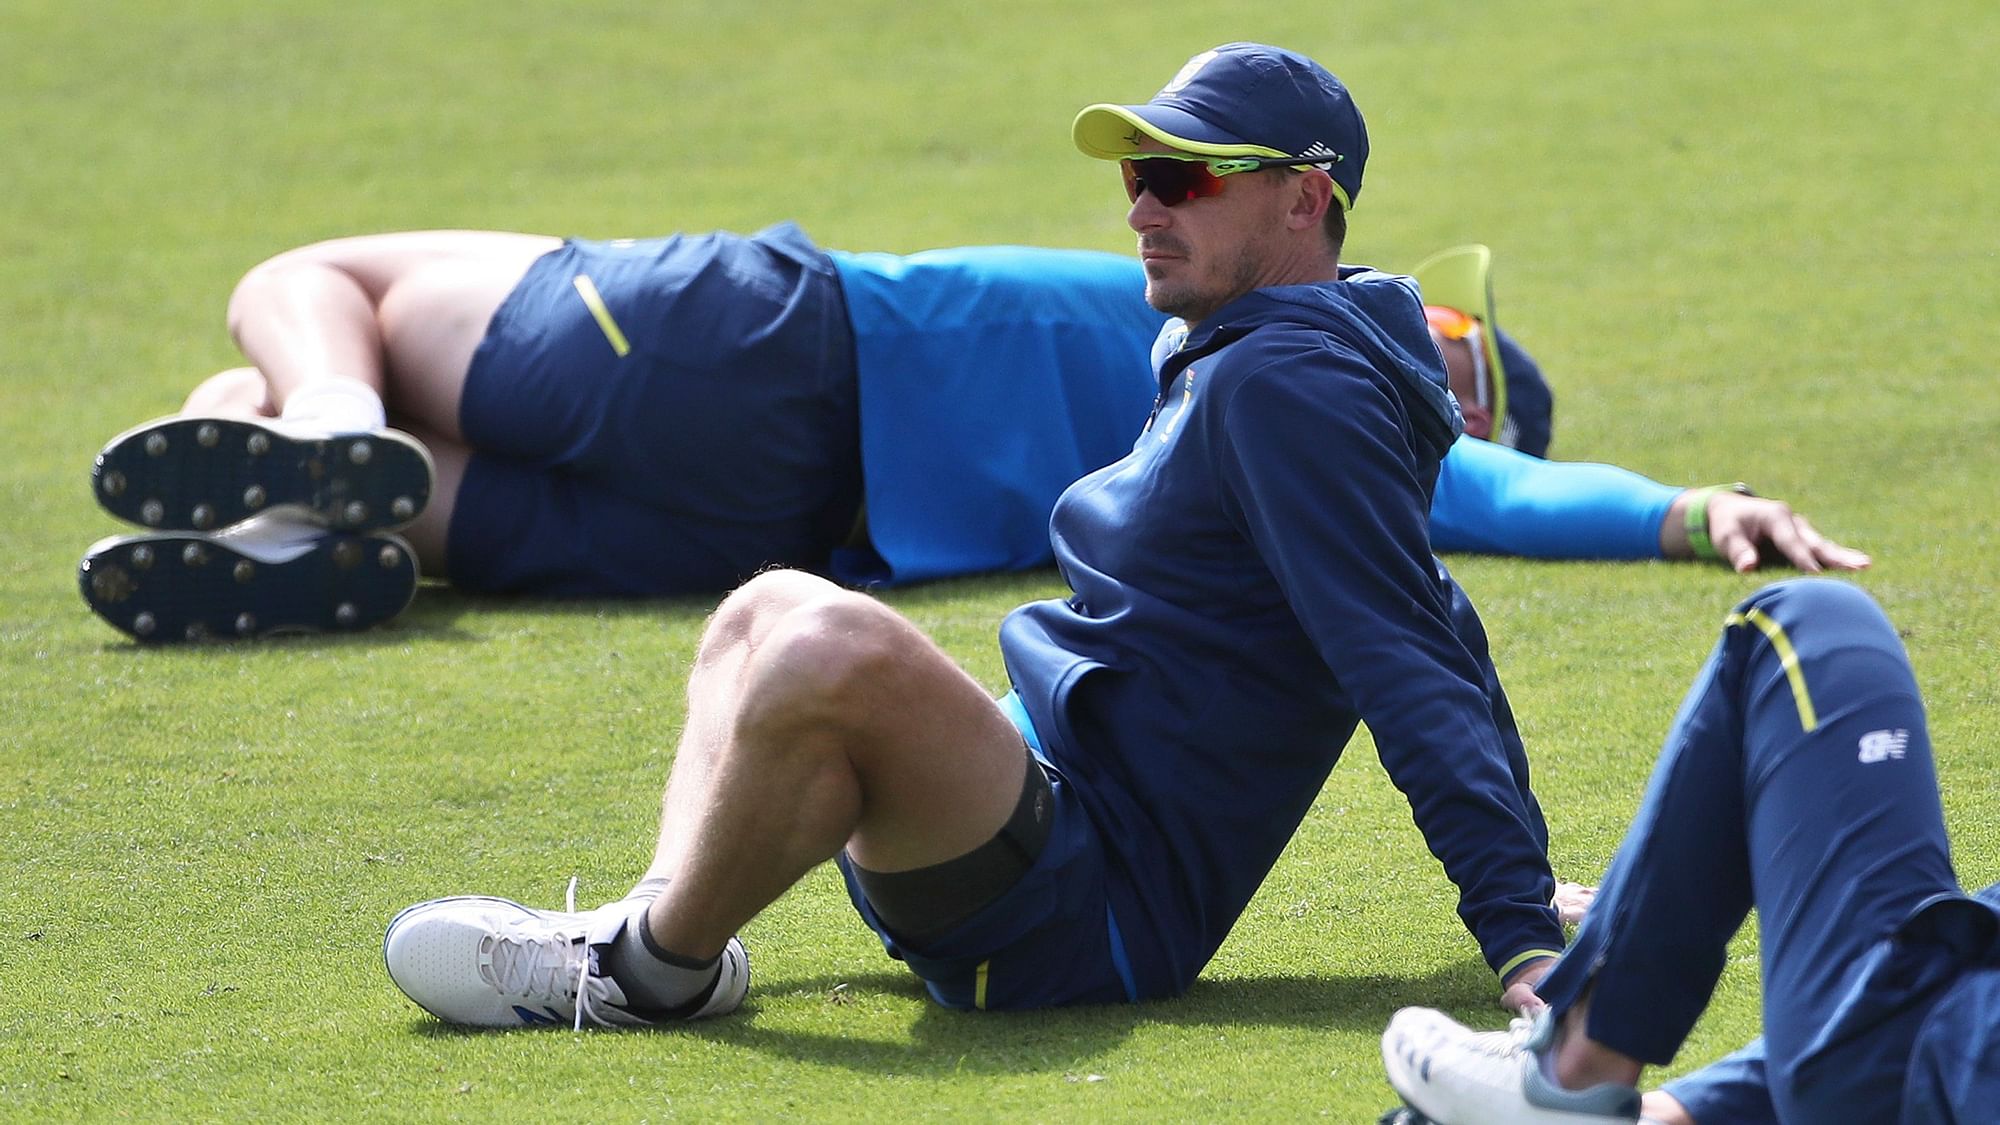 South Africa’s Dale Steyn was ruled out of ICC World Cup 2019 owing to a second shoulder injury.